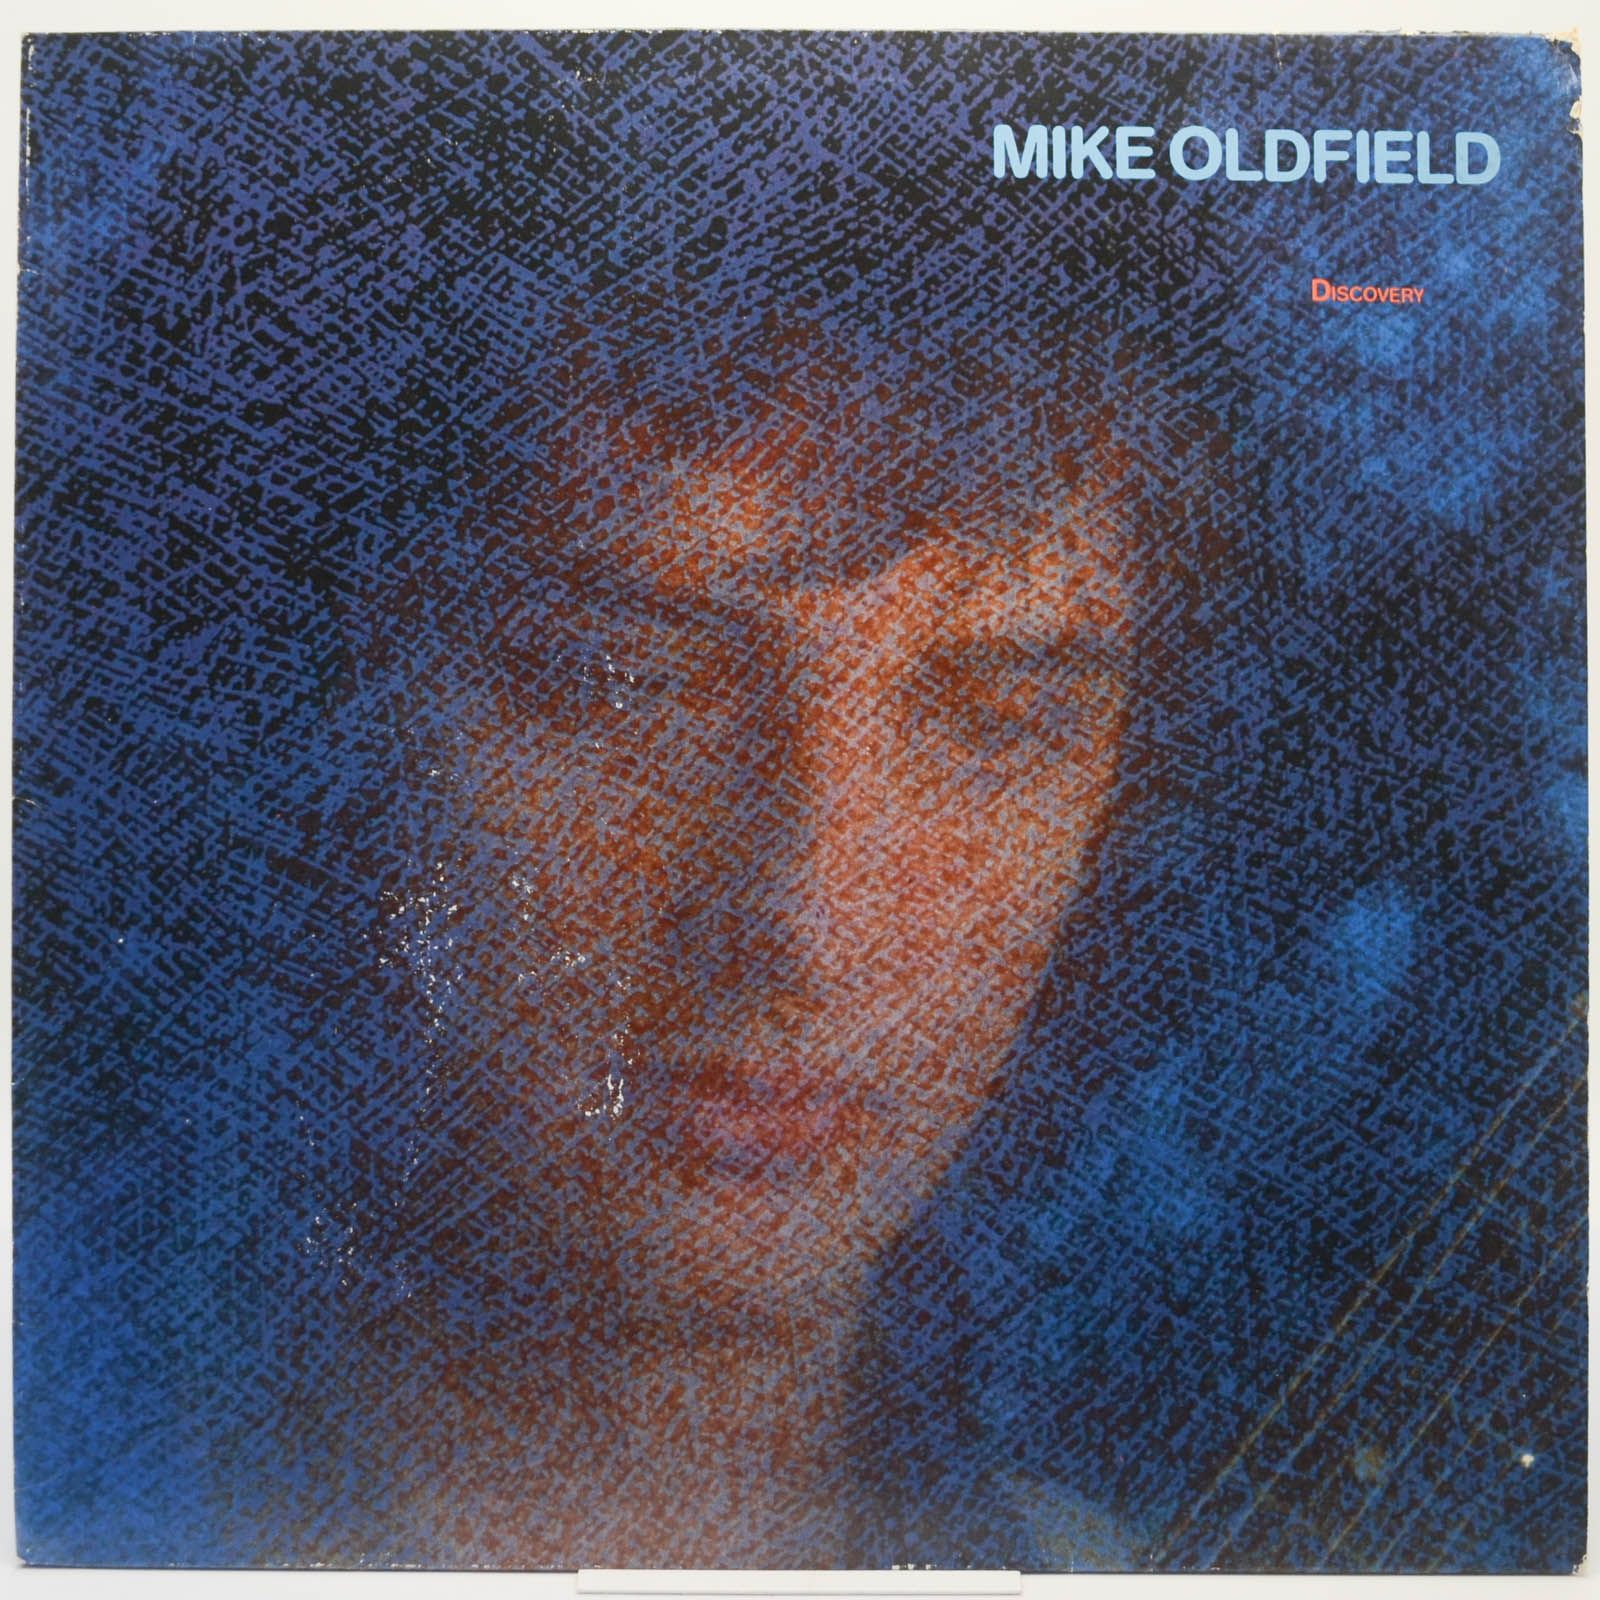 Mike Oldfield — Discovery, 1984